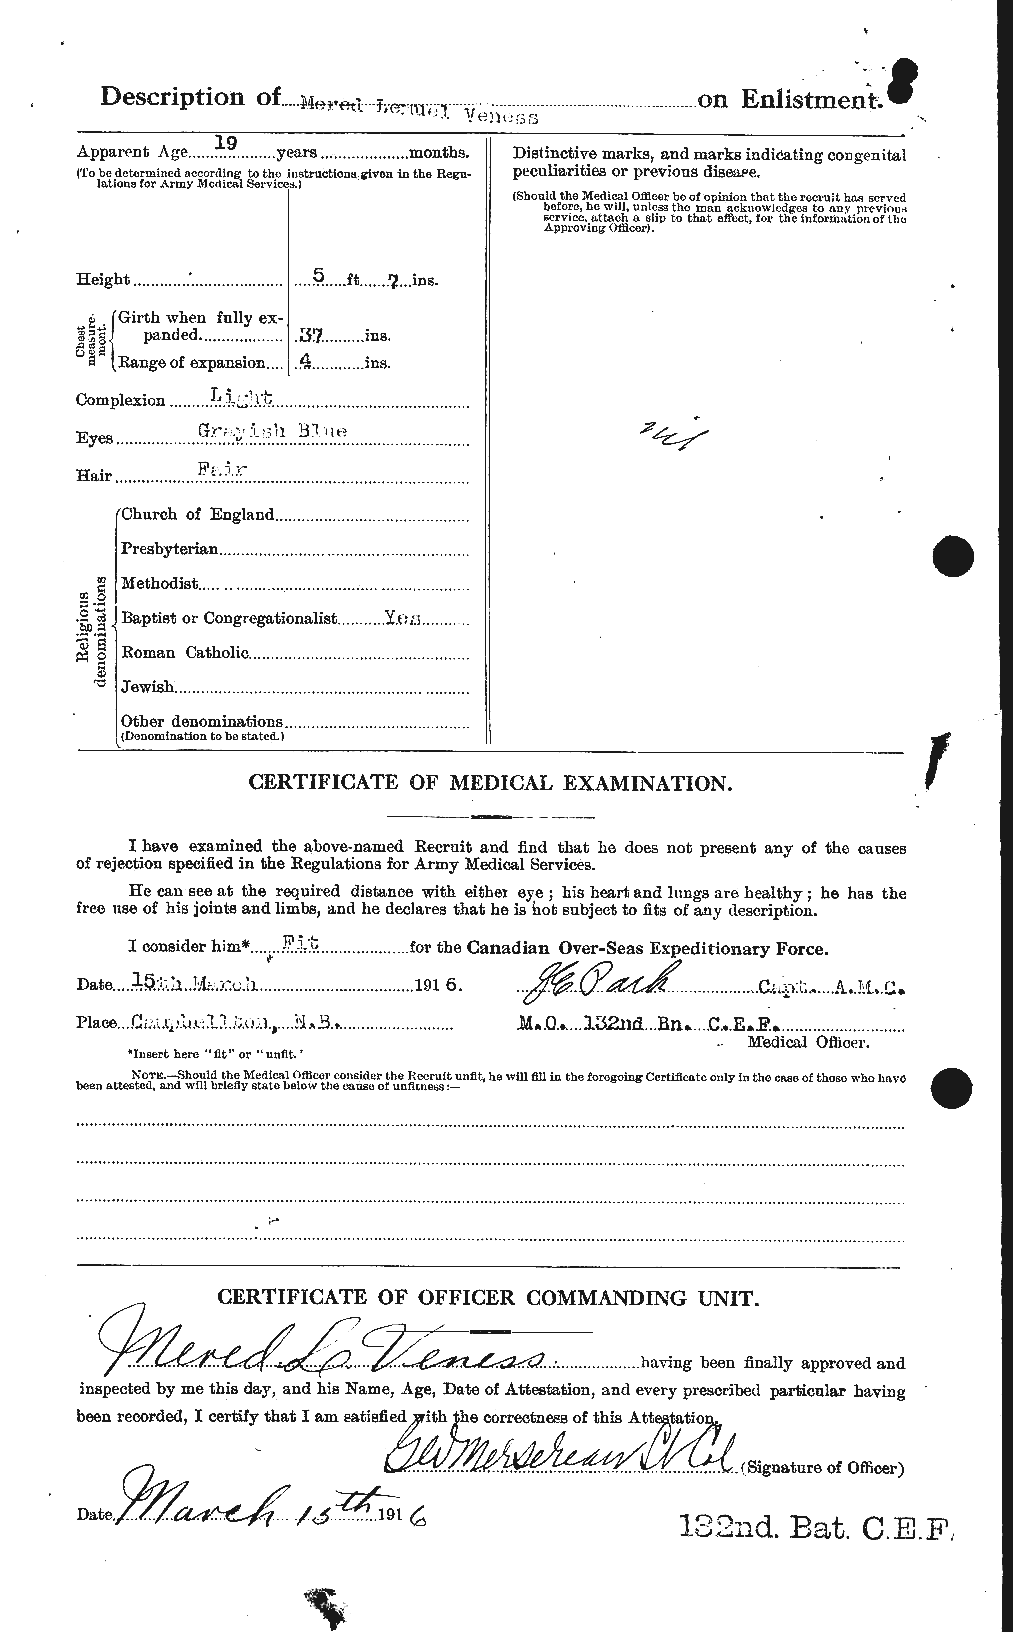 Personnel Records of the First World War - CEF 649271b